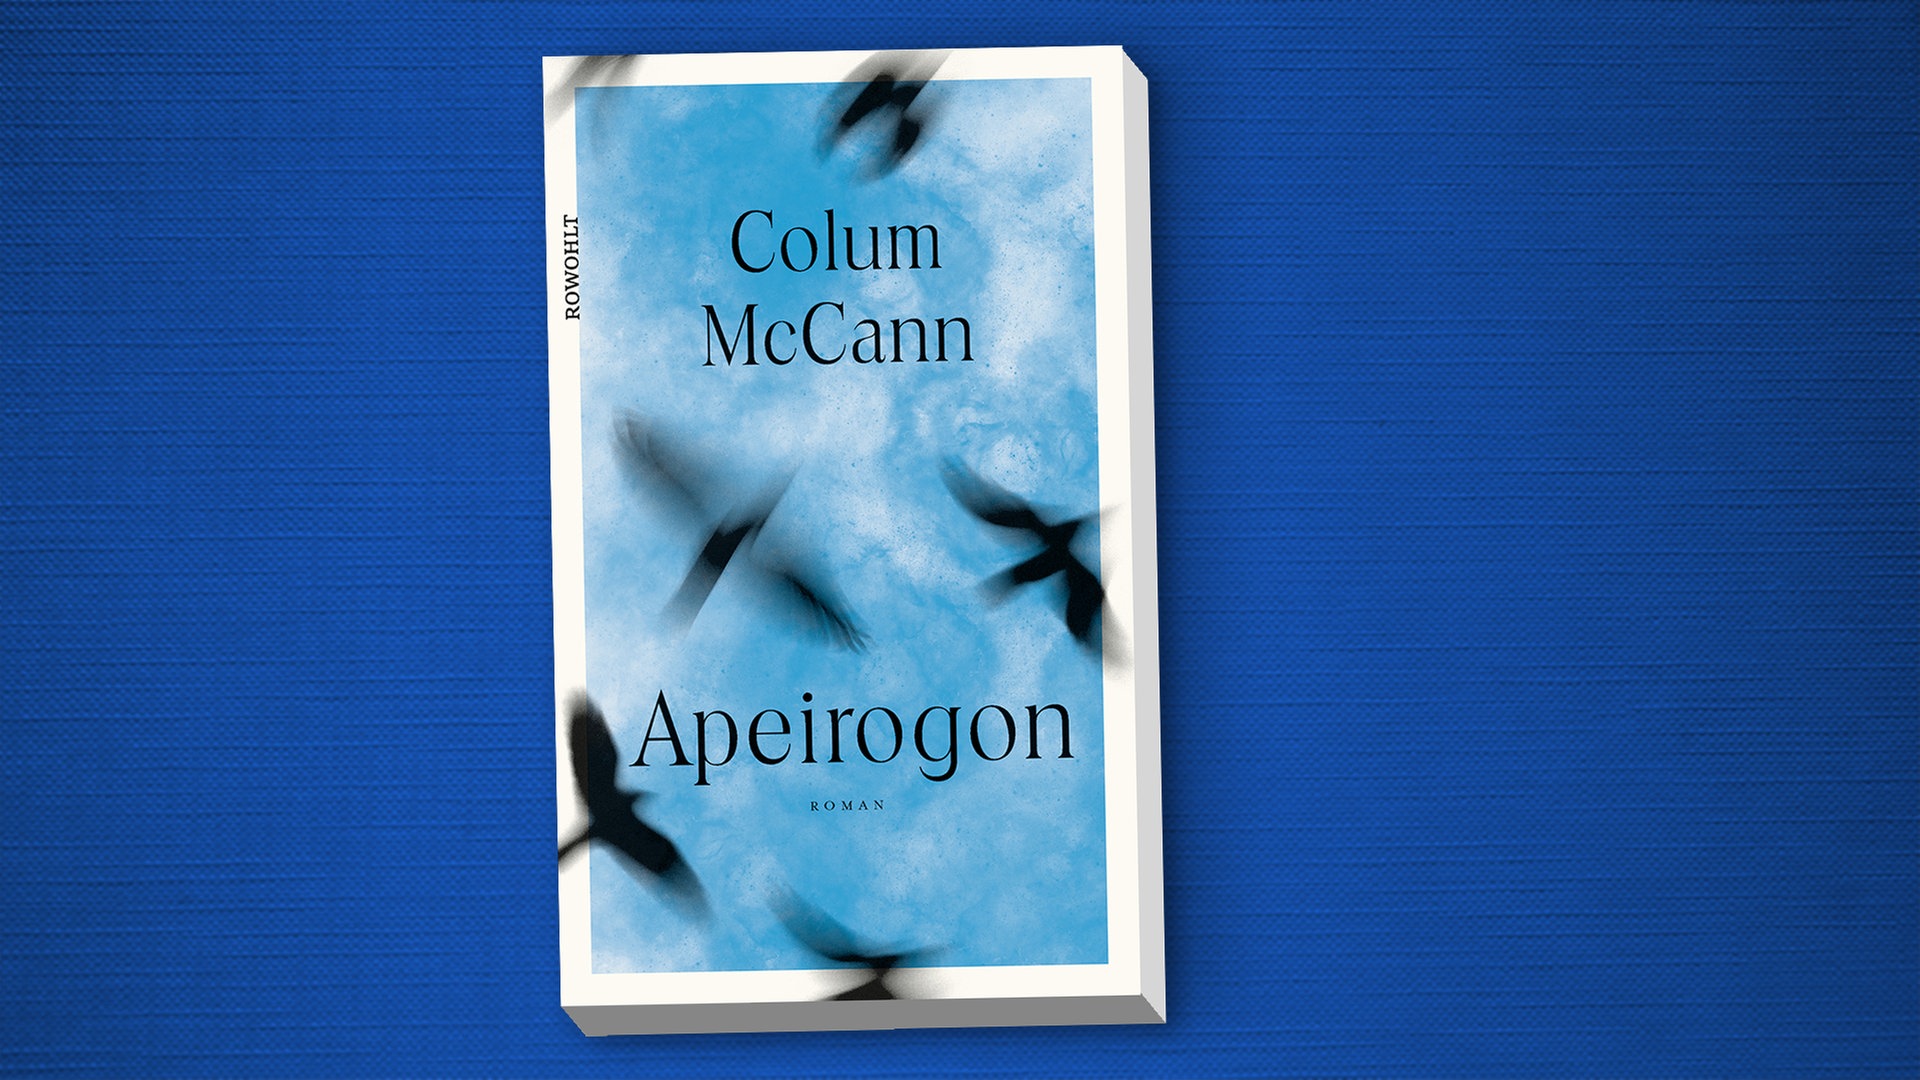 Cover of Colum McCann's “Apeirogon” (published by Bloomsbury)